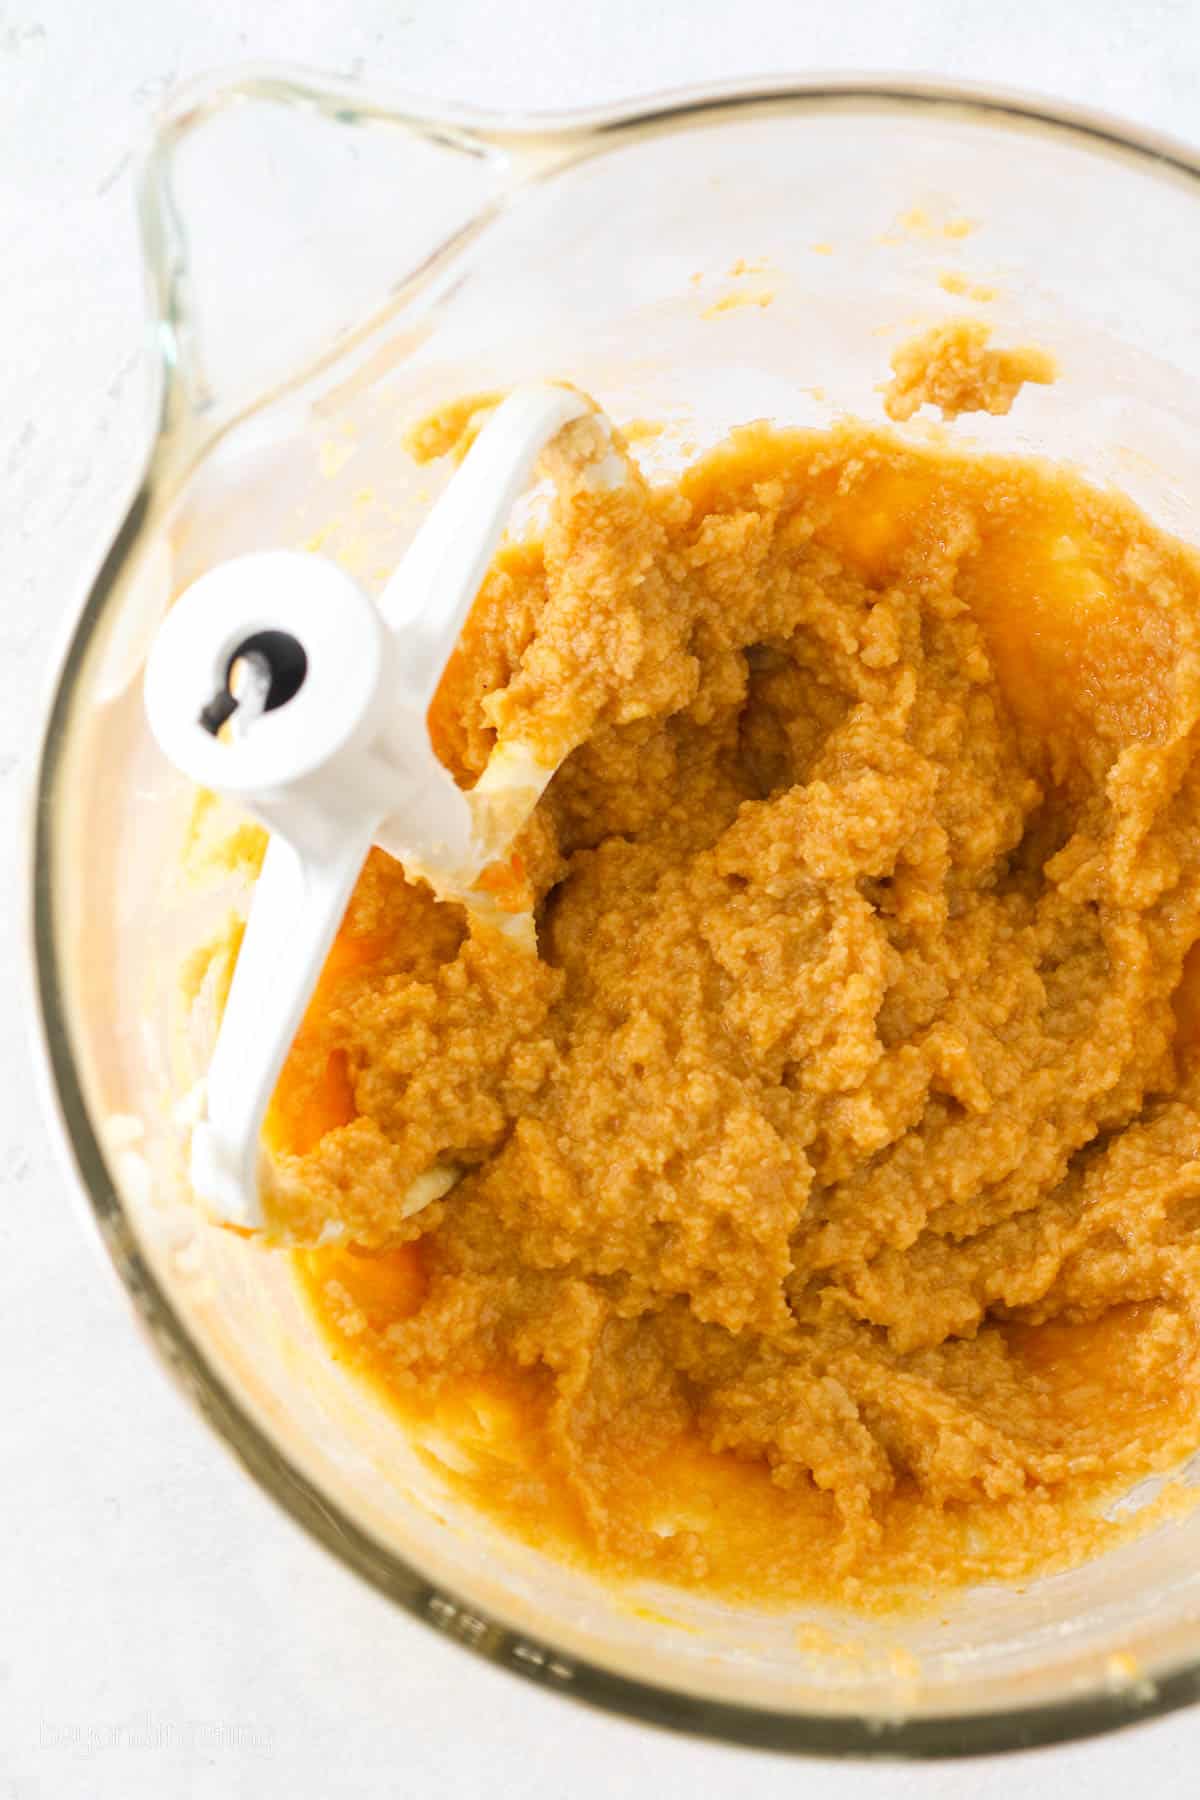 Pumpkin puree combined in a mixing bowl with cookie dough ingredients.